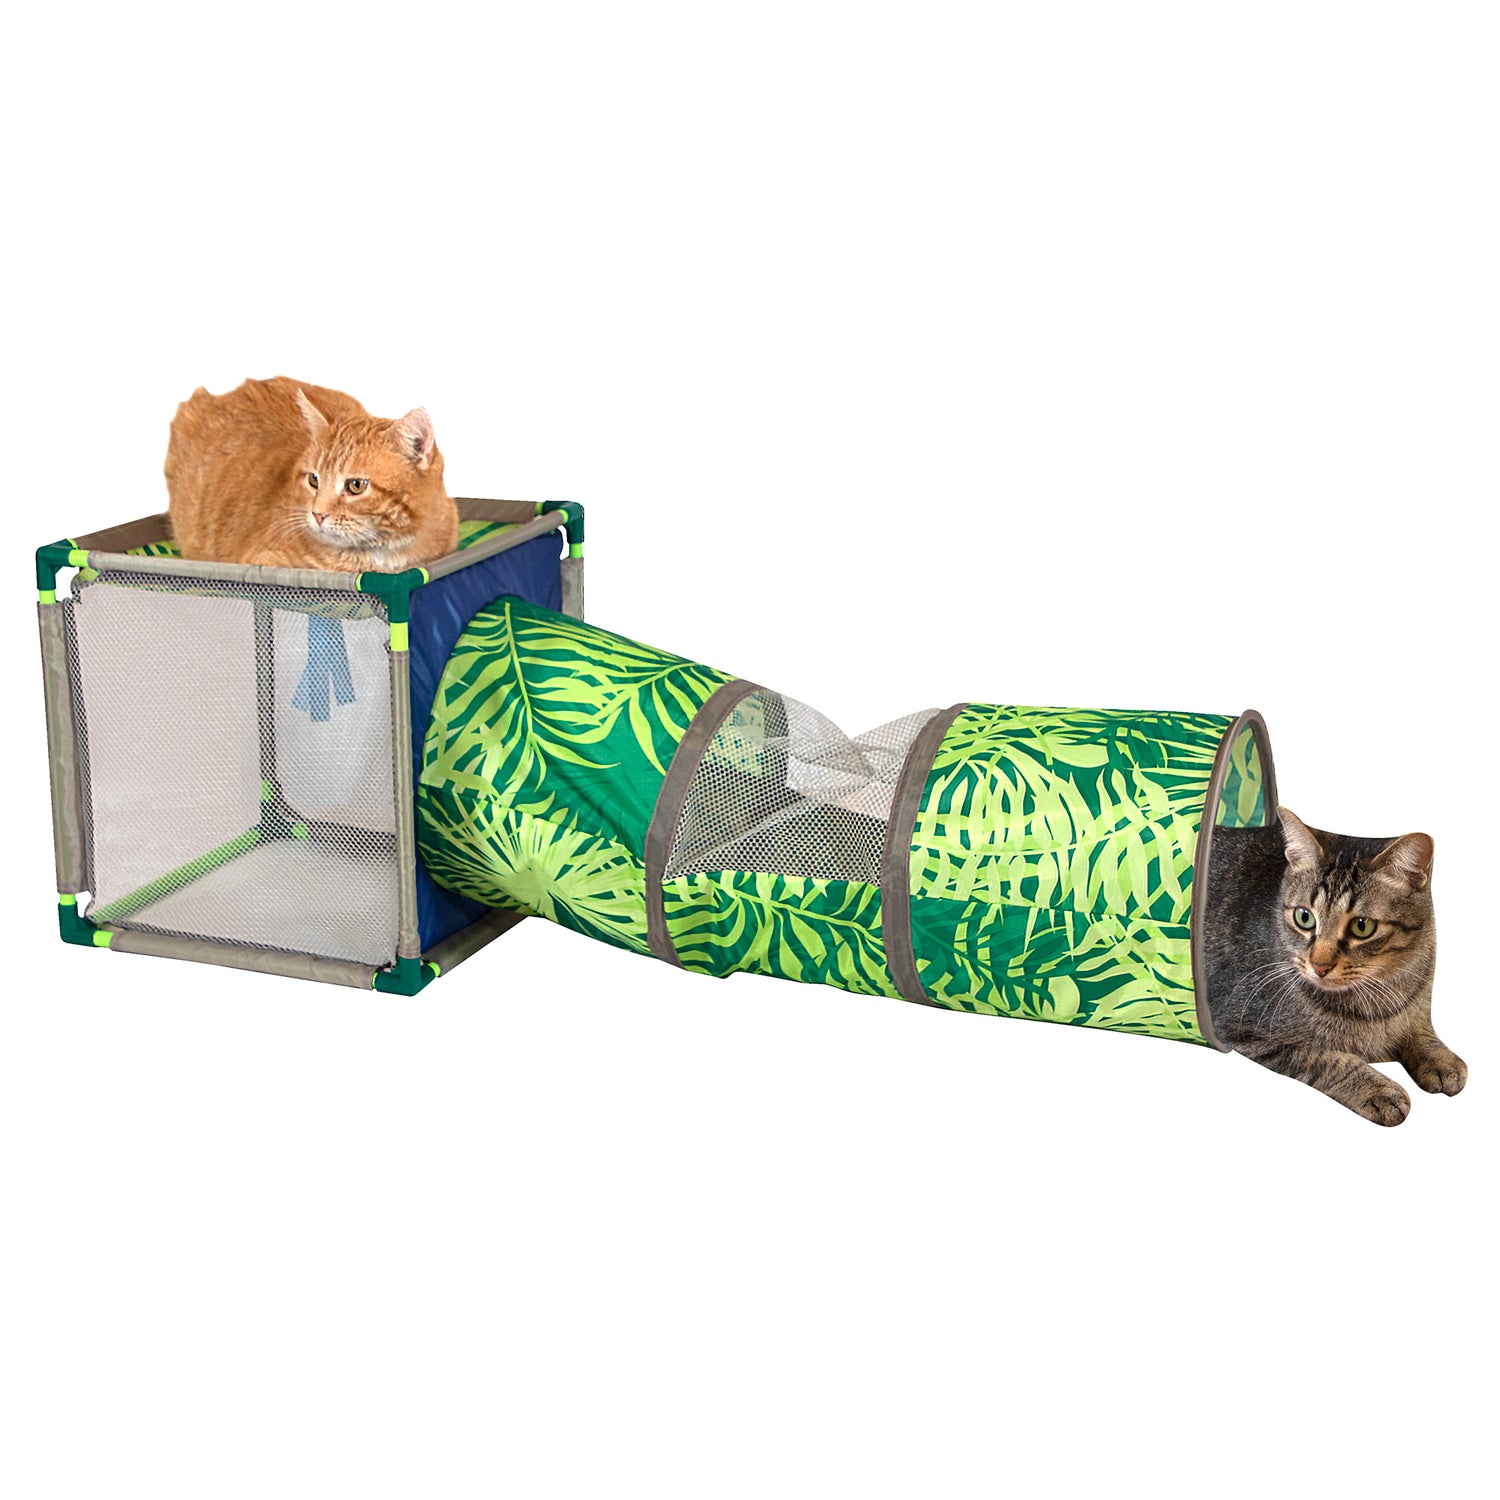 Kitty City Cat Furniture Jungle Party